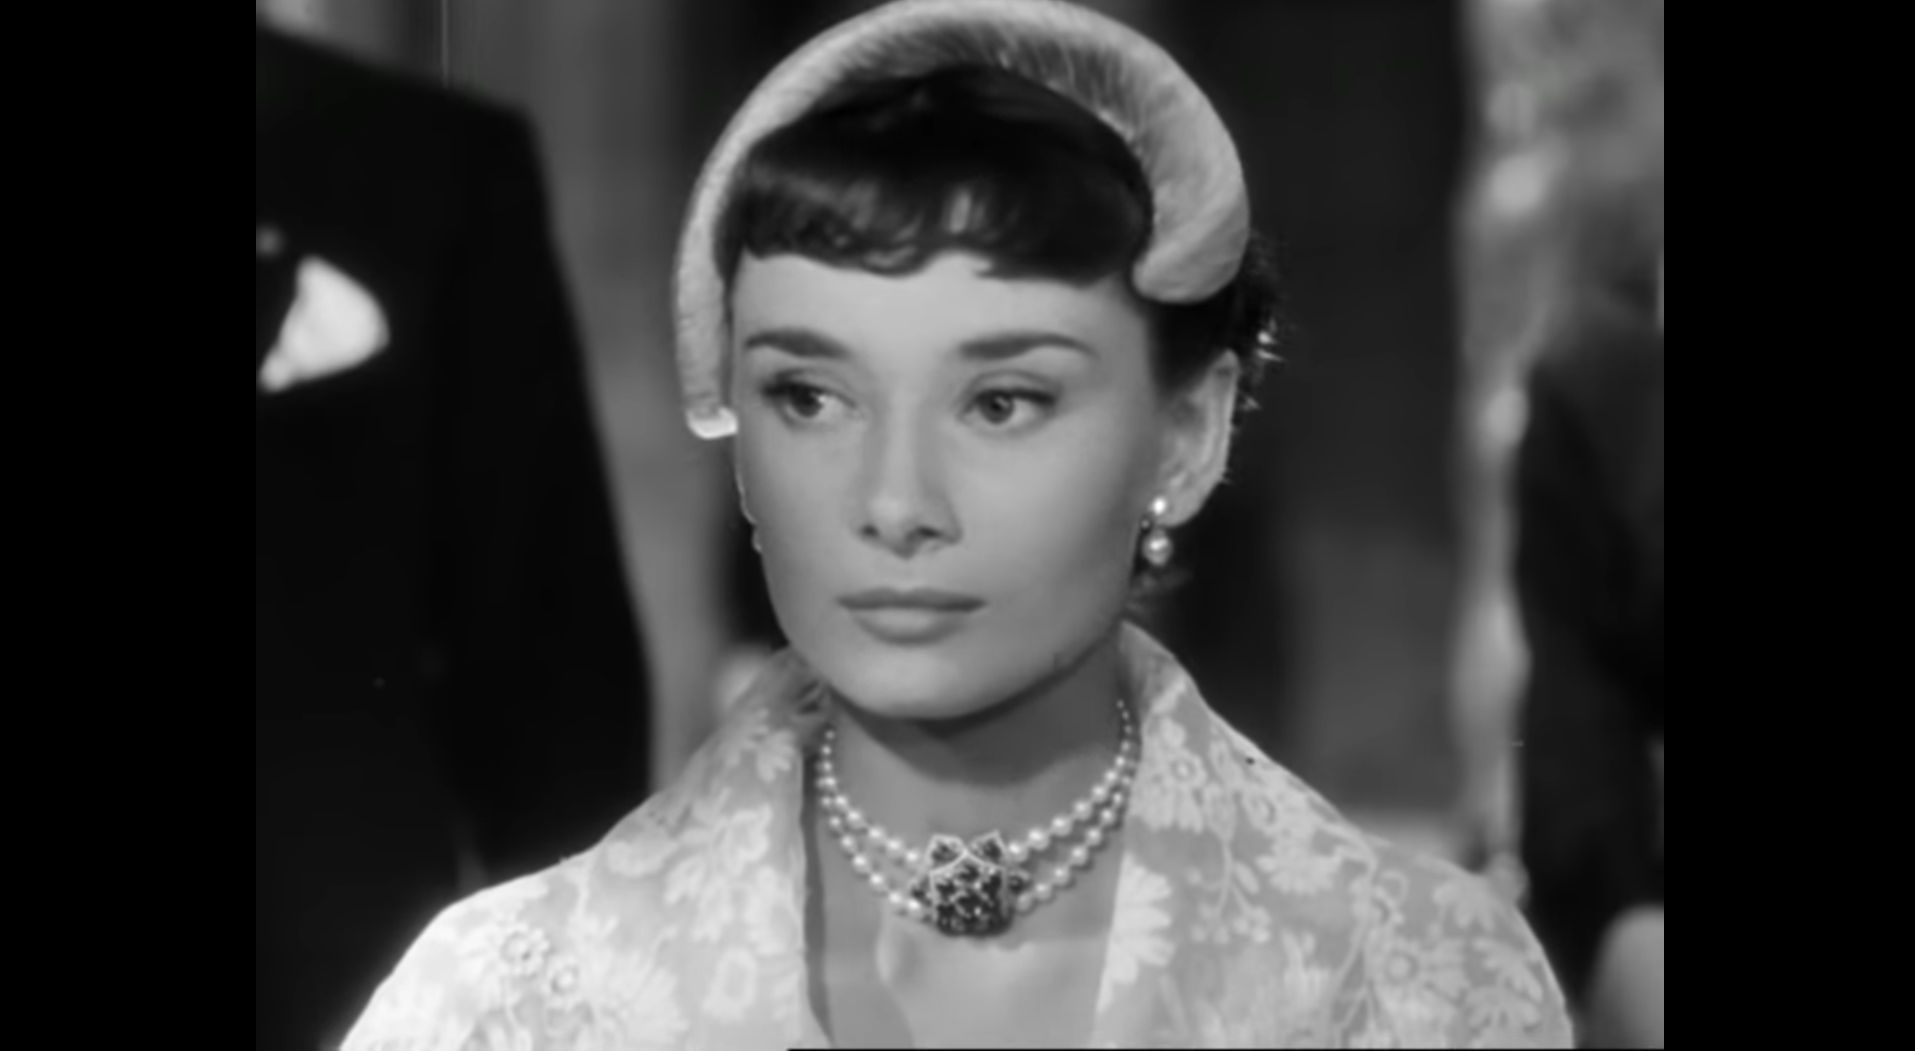 GREAT MOMENT IN PEARL HISTORY: Audrey Hepburn Wearing Pearls - PearlsOnly  :: PearlsOnly | Save up to 80% with Pearls Only France